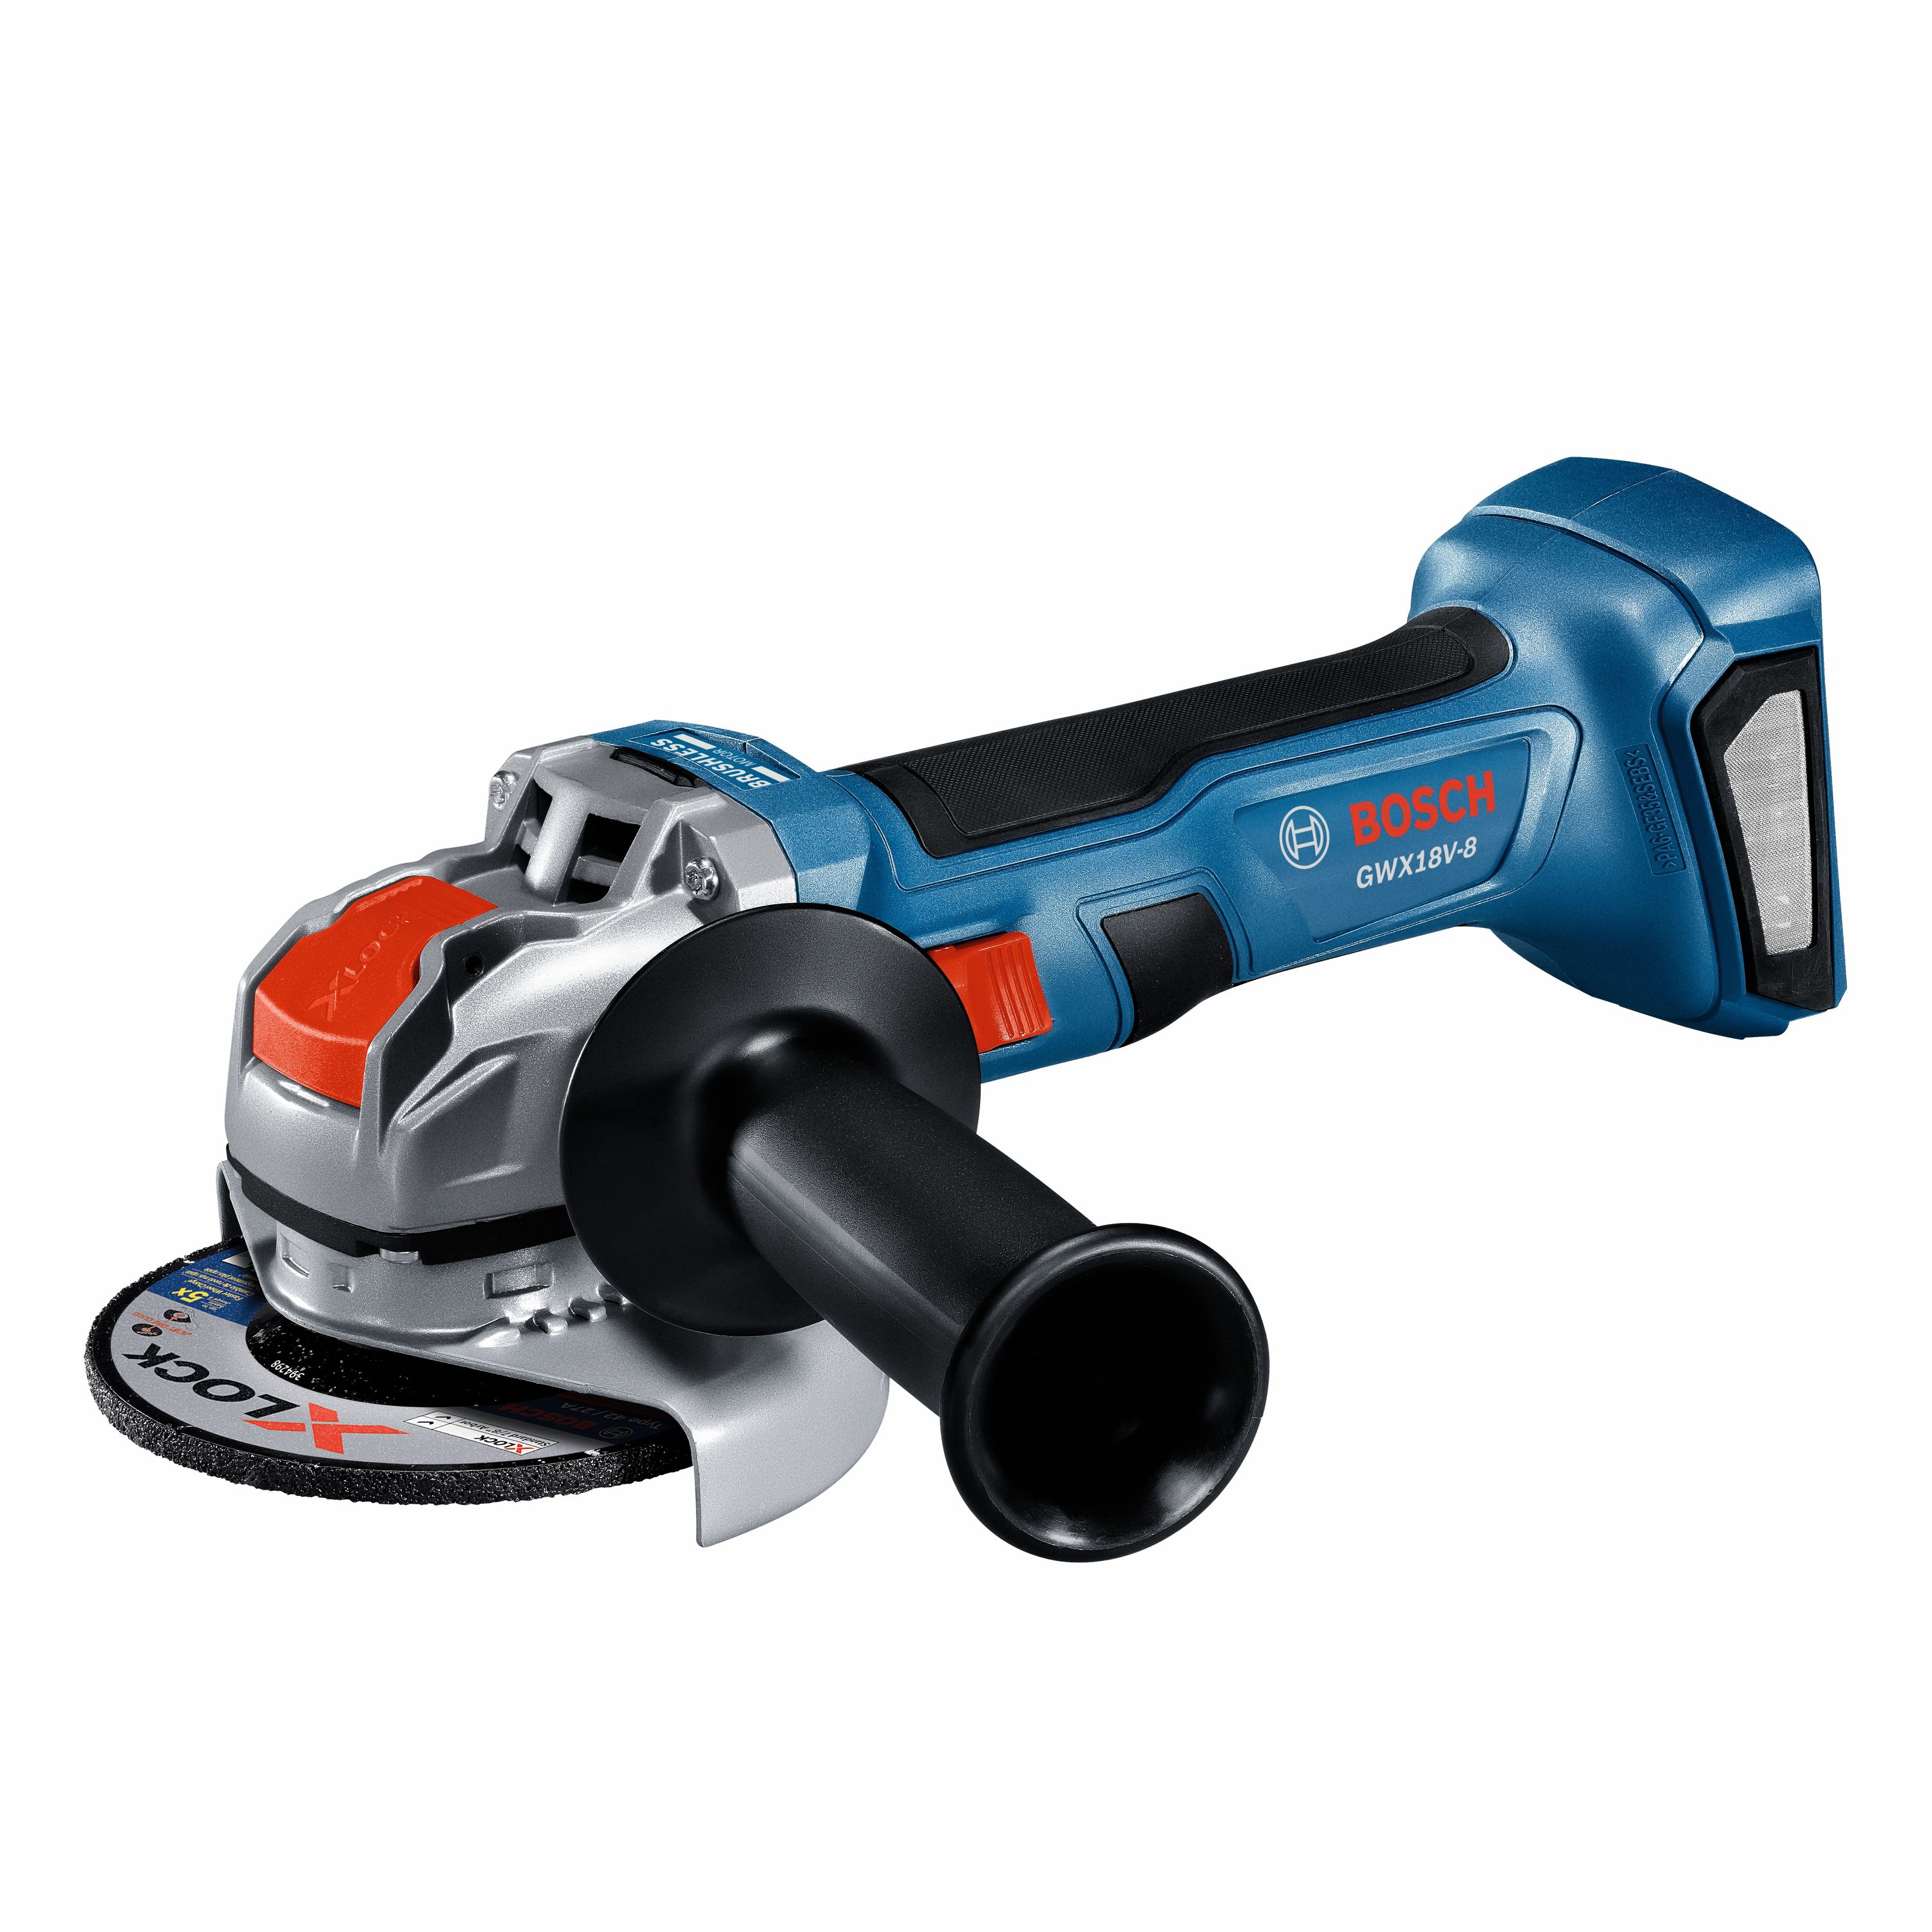 Cordless Standard Angle Grinders